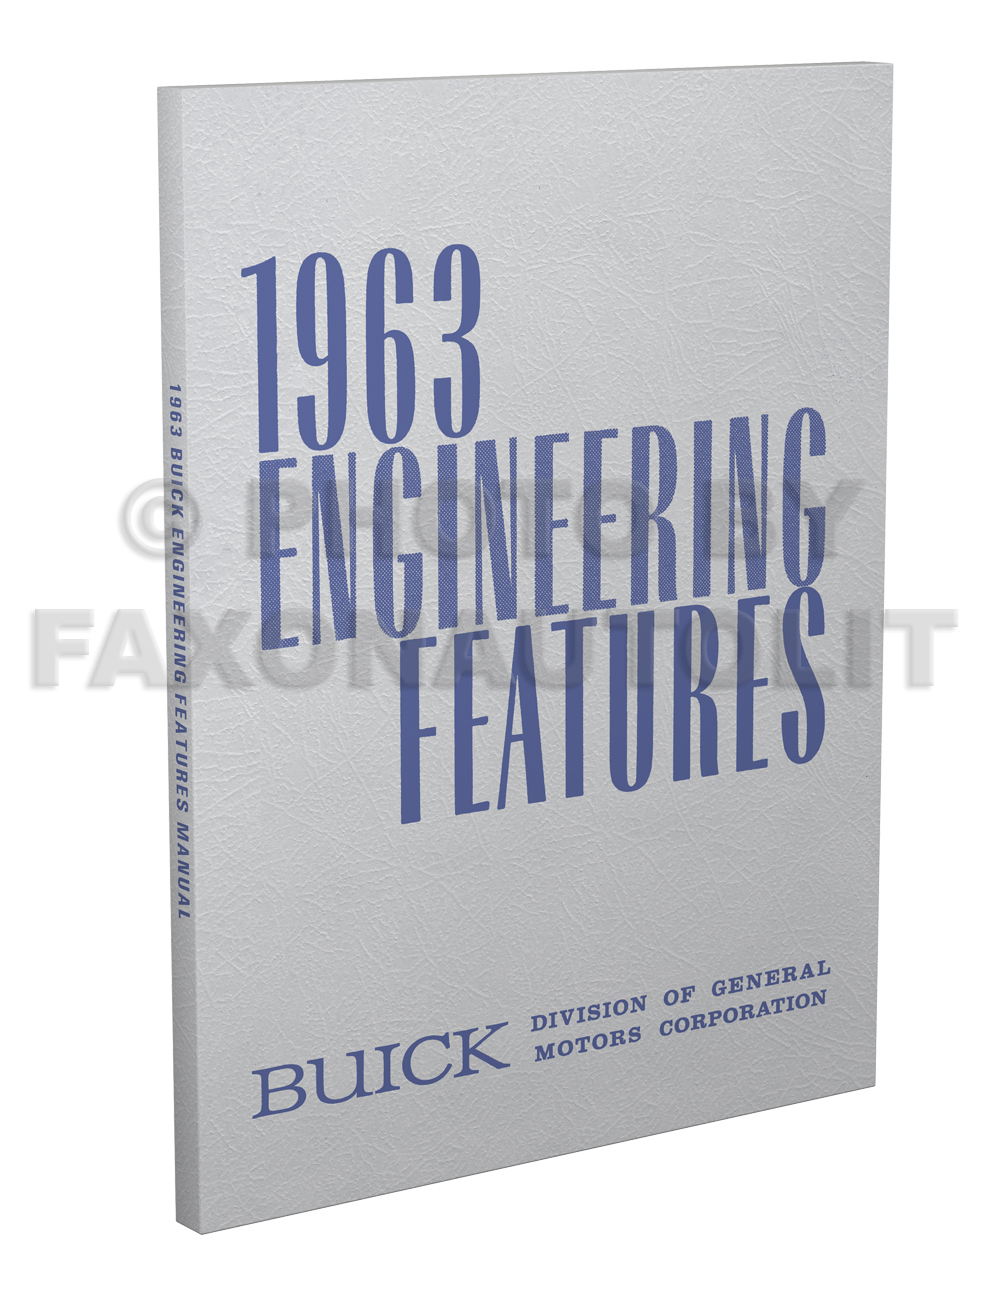 1963 Buick Engineering Features Manual Reprint